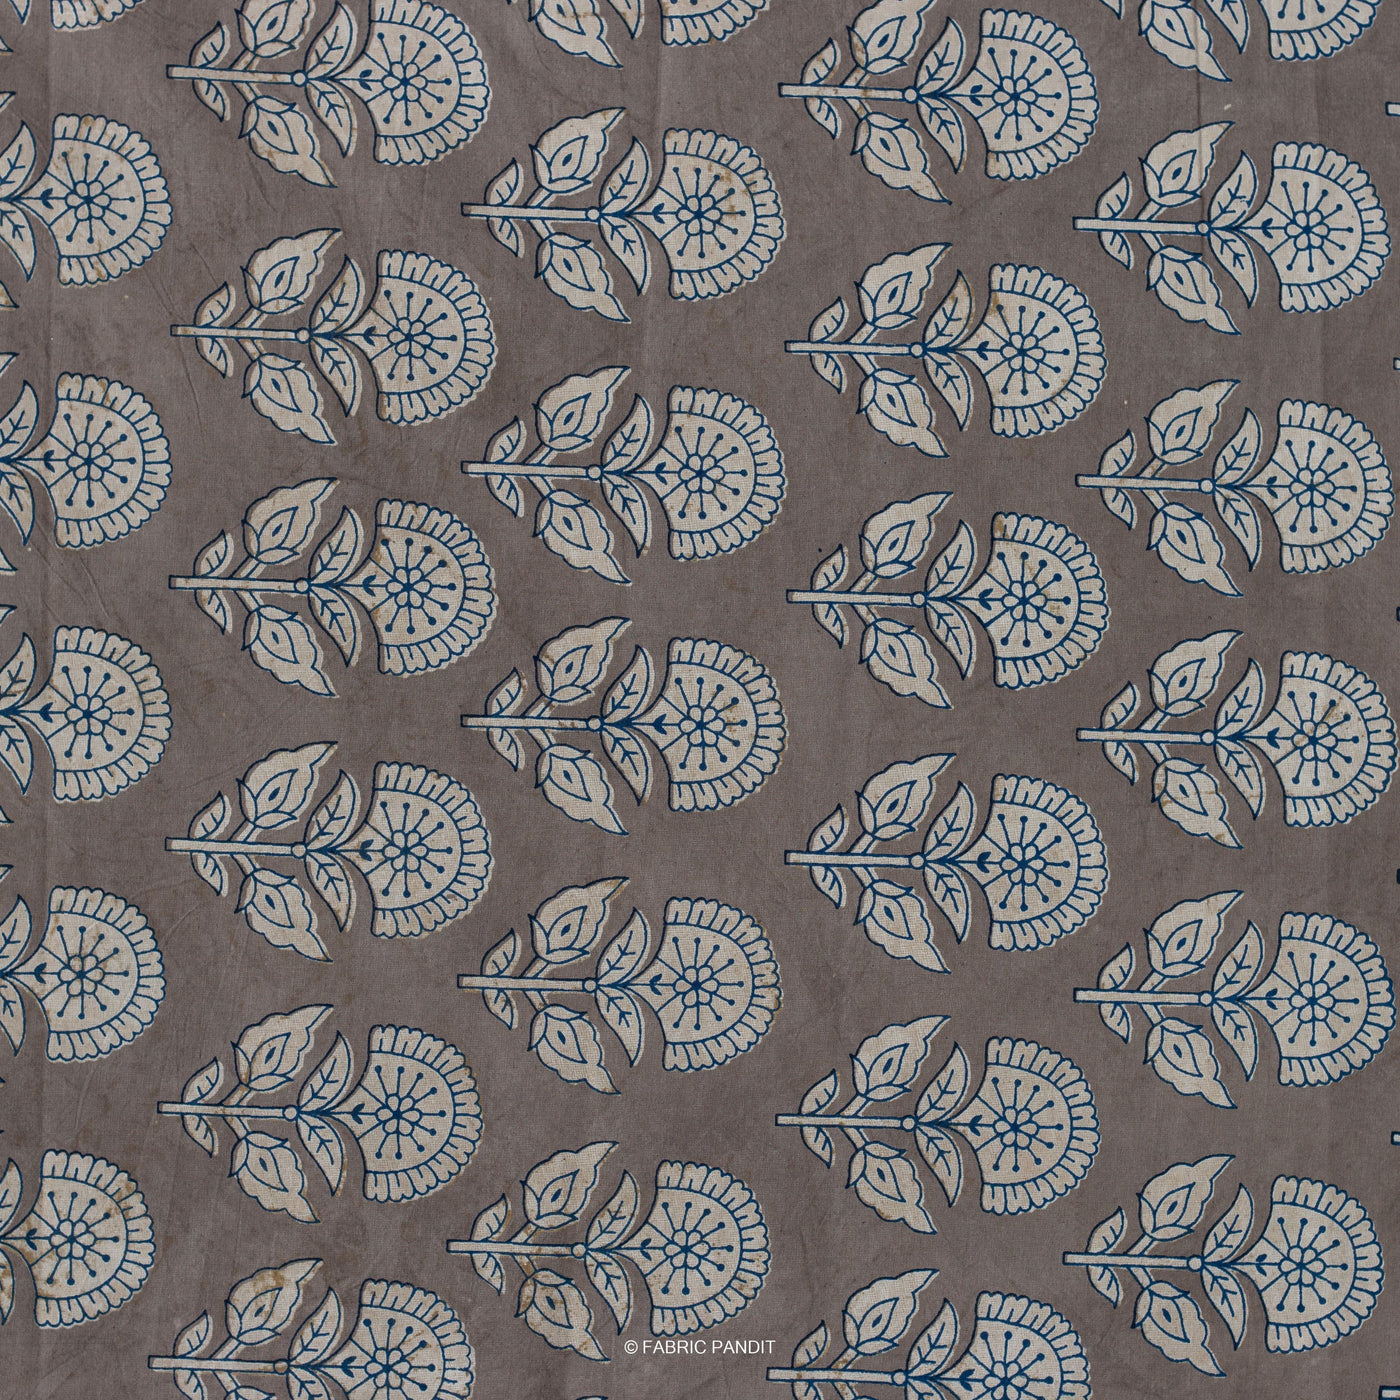 Fabric Pandit Fabric Mud Brown Egyptian Flowers Hand Block Printed Pure Cotton Fabric (Width 43 Inches)